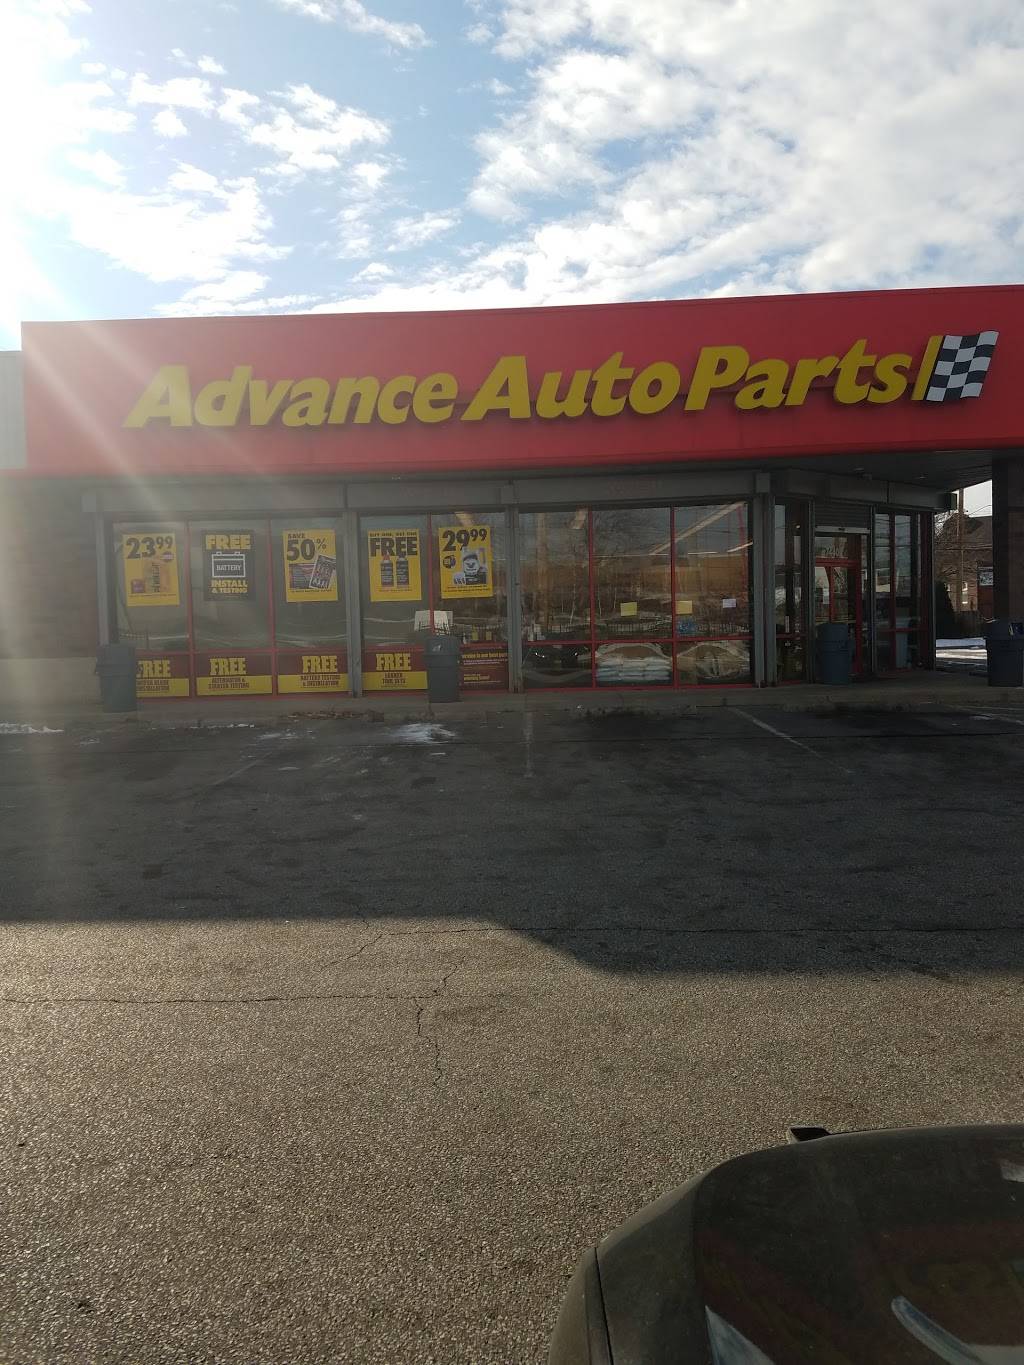 Advance Auto Parts | 7440 Broadway Ave, Cleveland, OH 44105 | Phone: (216) 883-4527